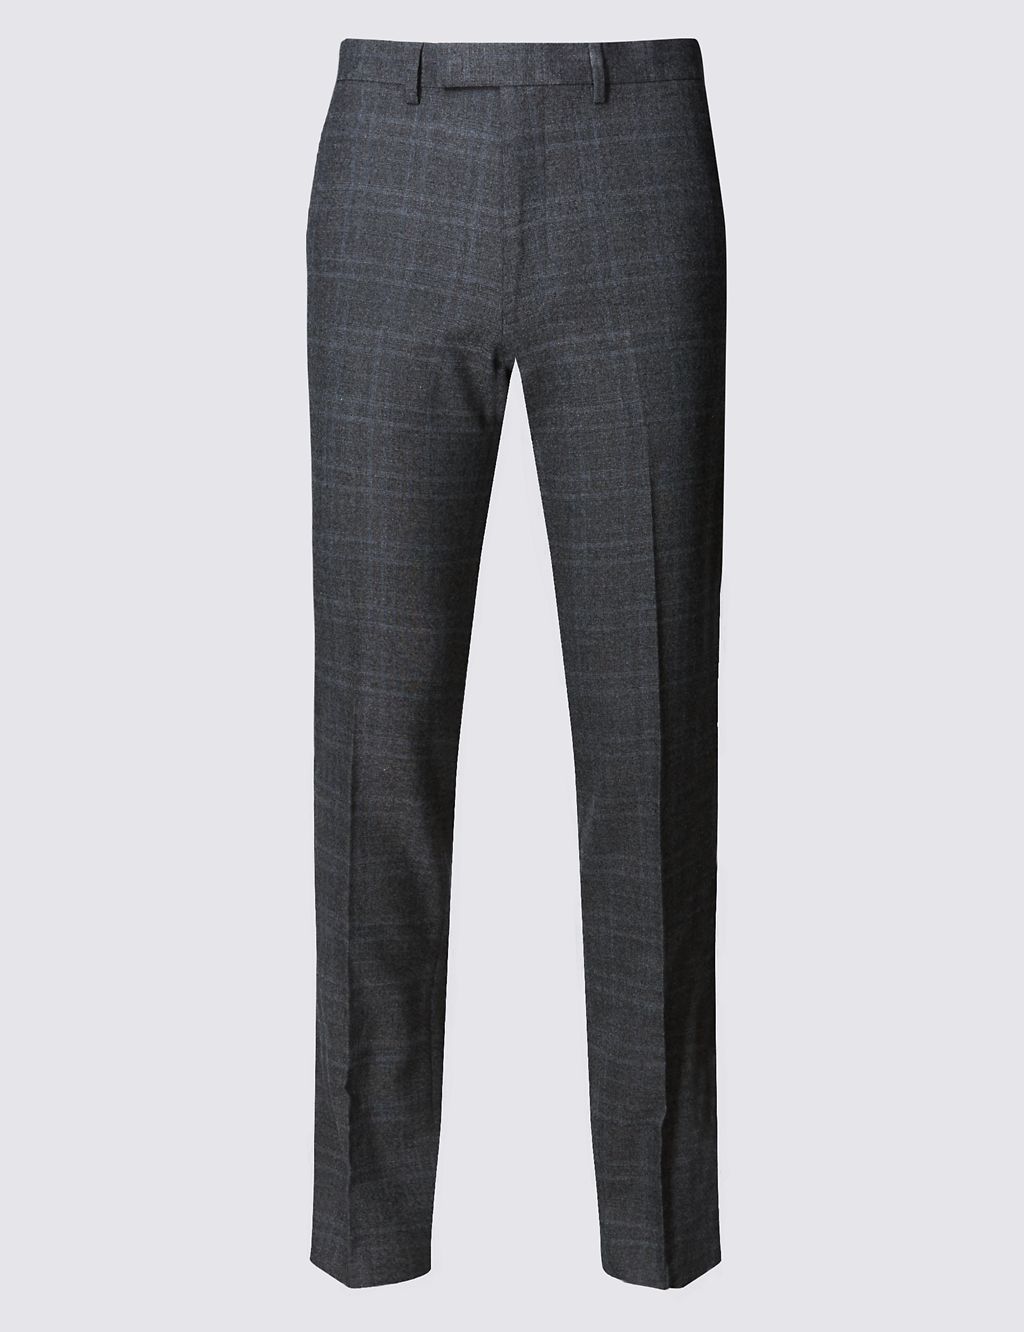 Grey Checked Modern Tailored Fit Trousers 1 of 5